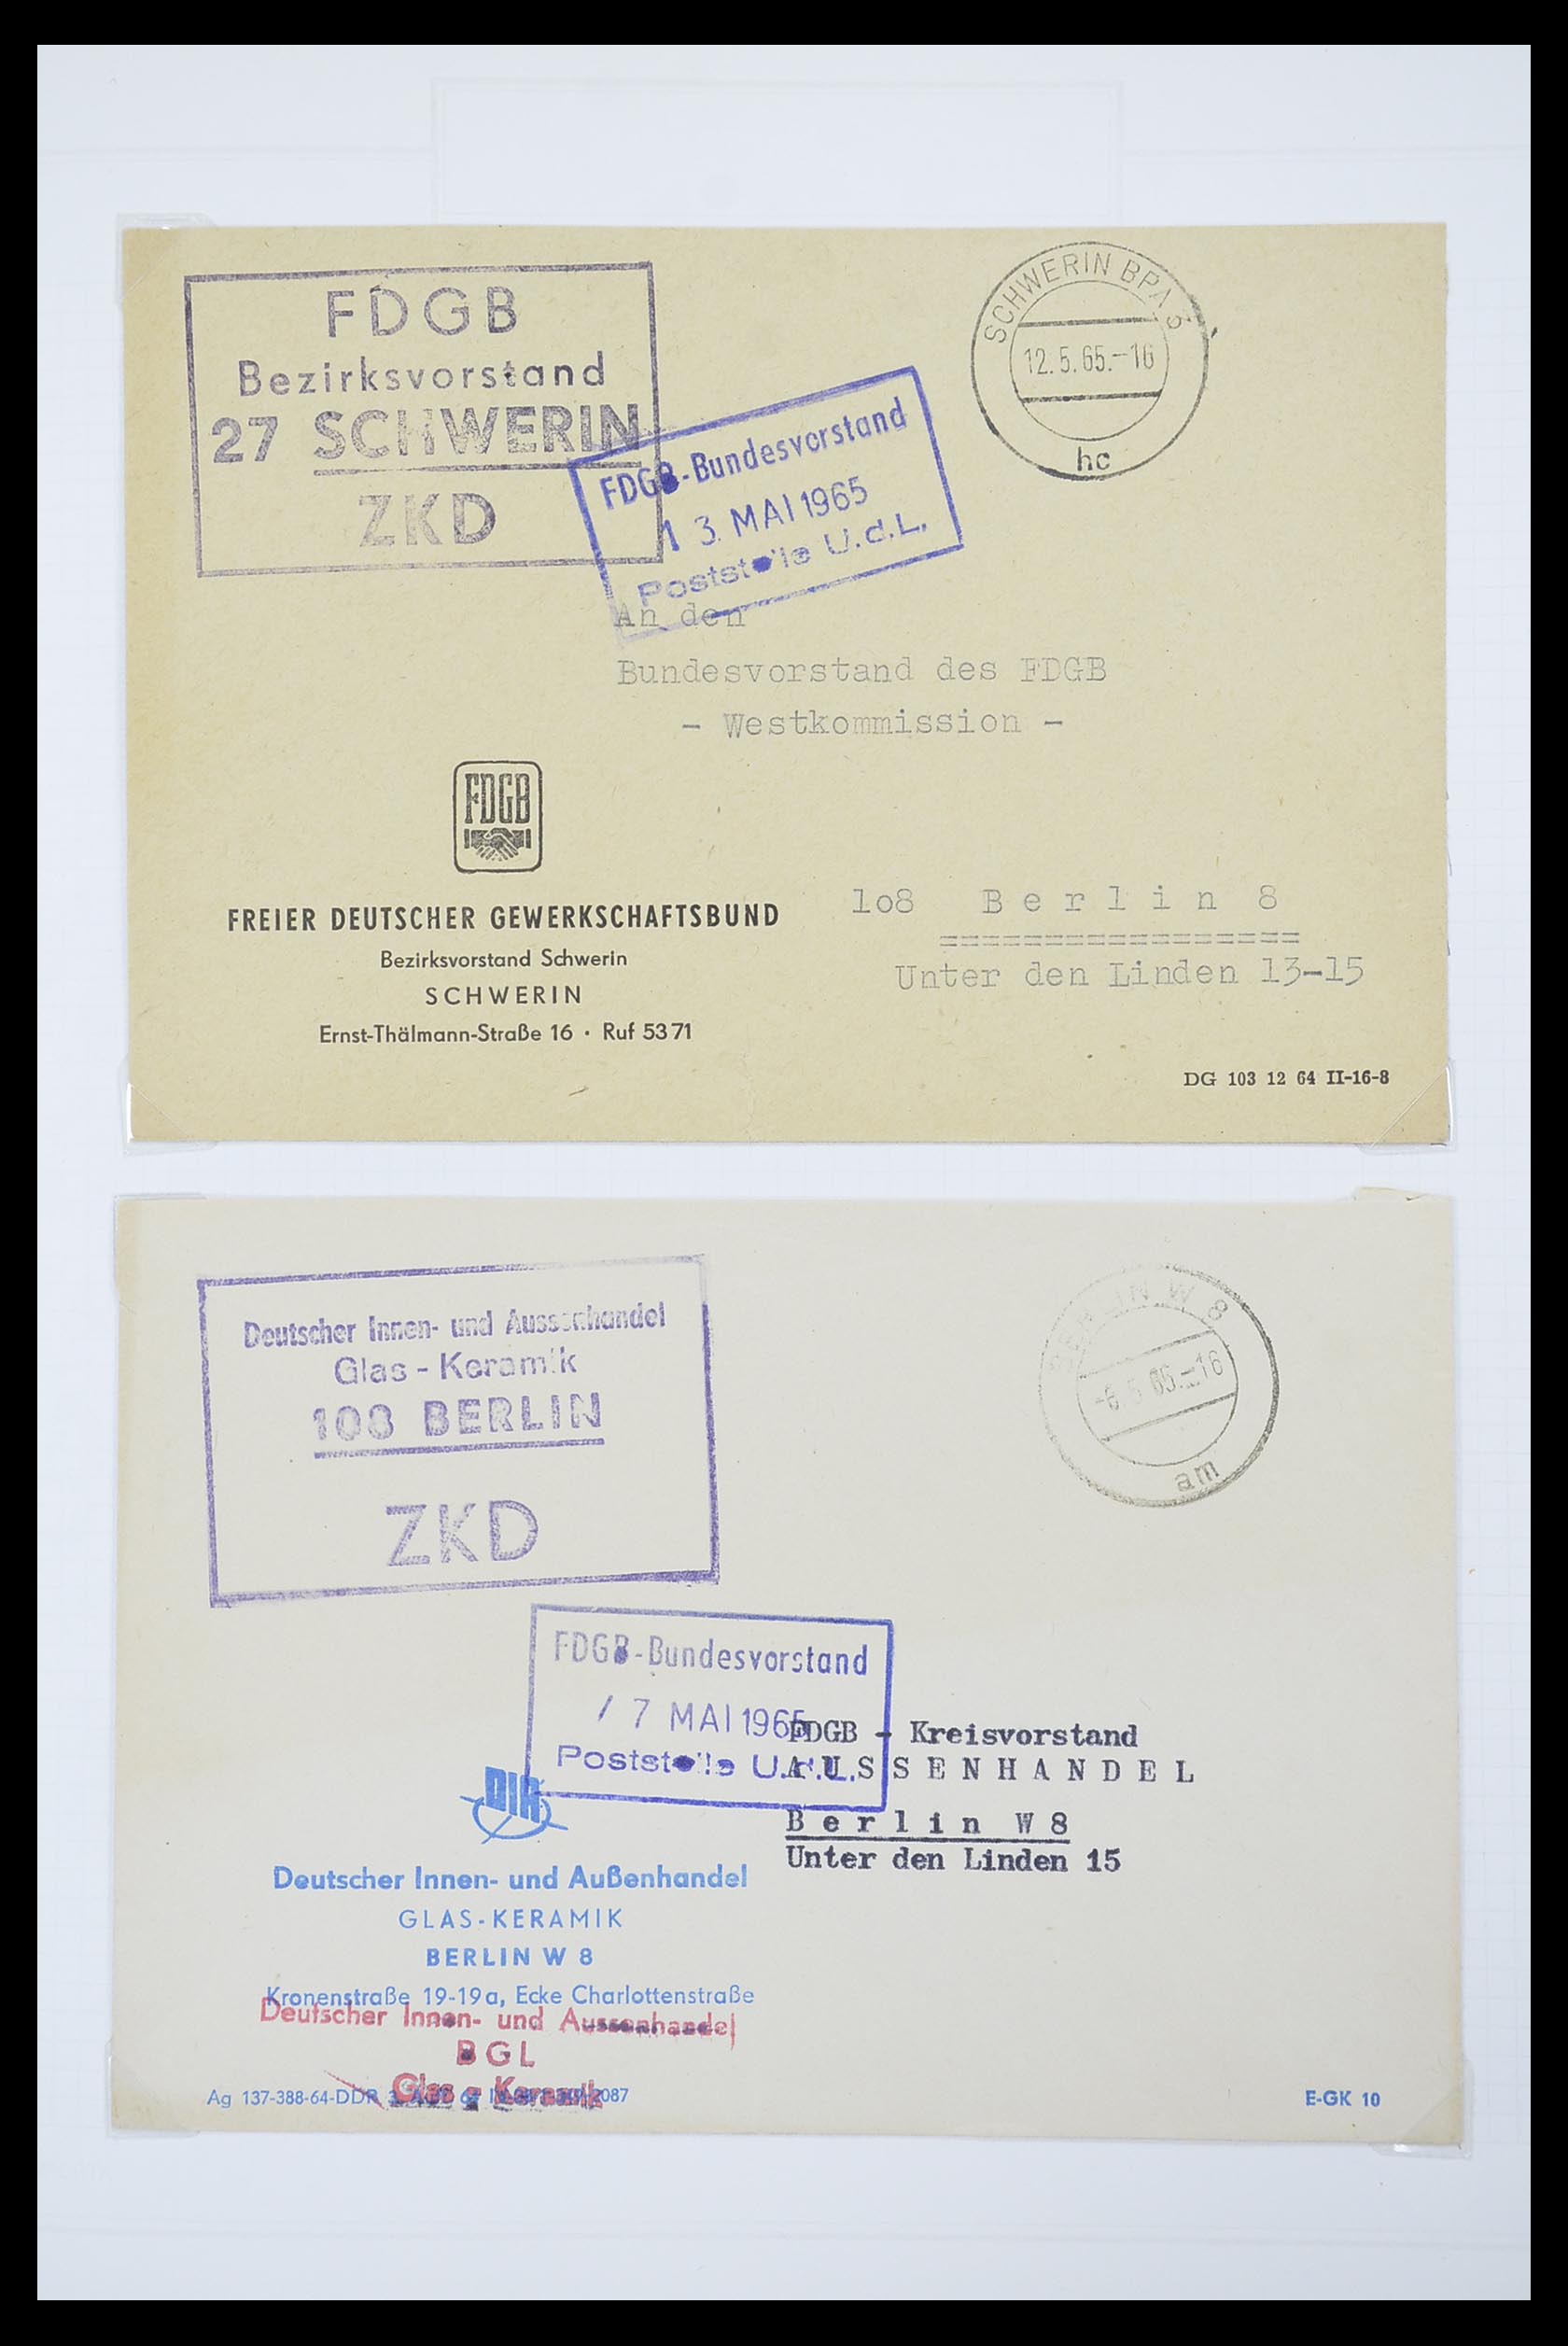 33883 019 - Stamp collection 33883 DDR service covers 1956-1986.